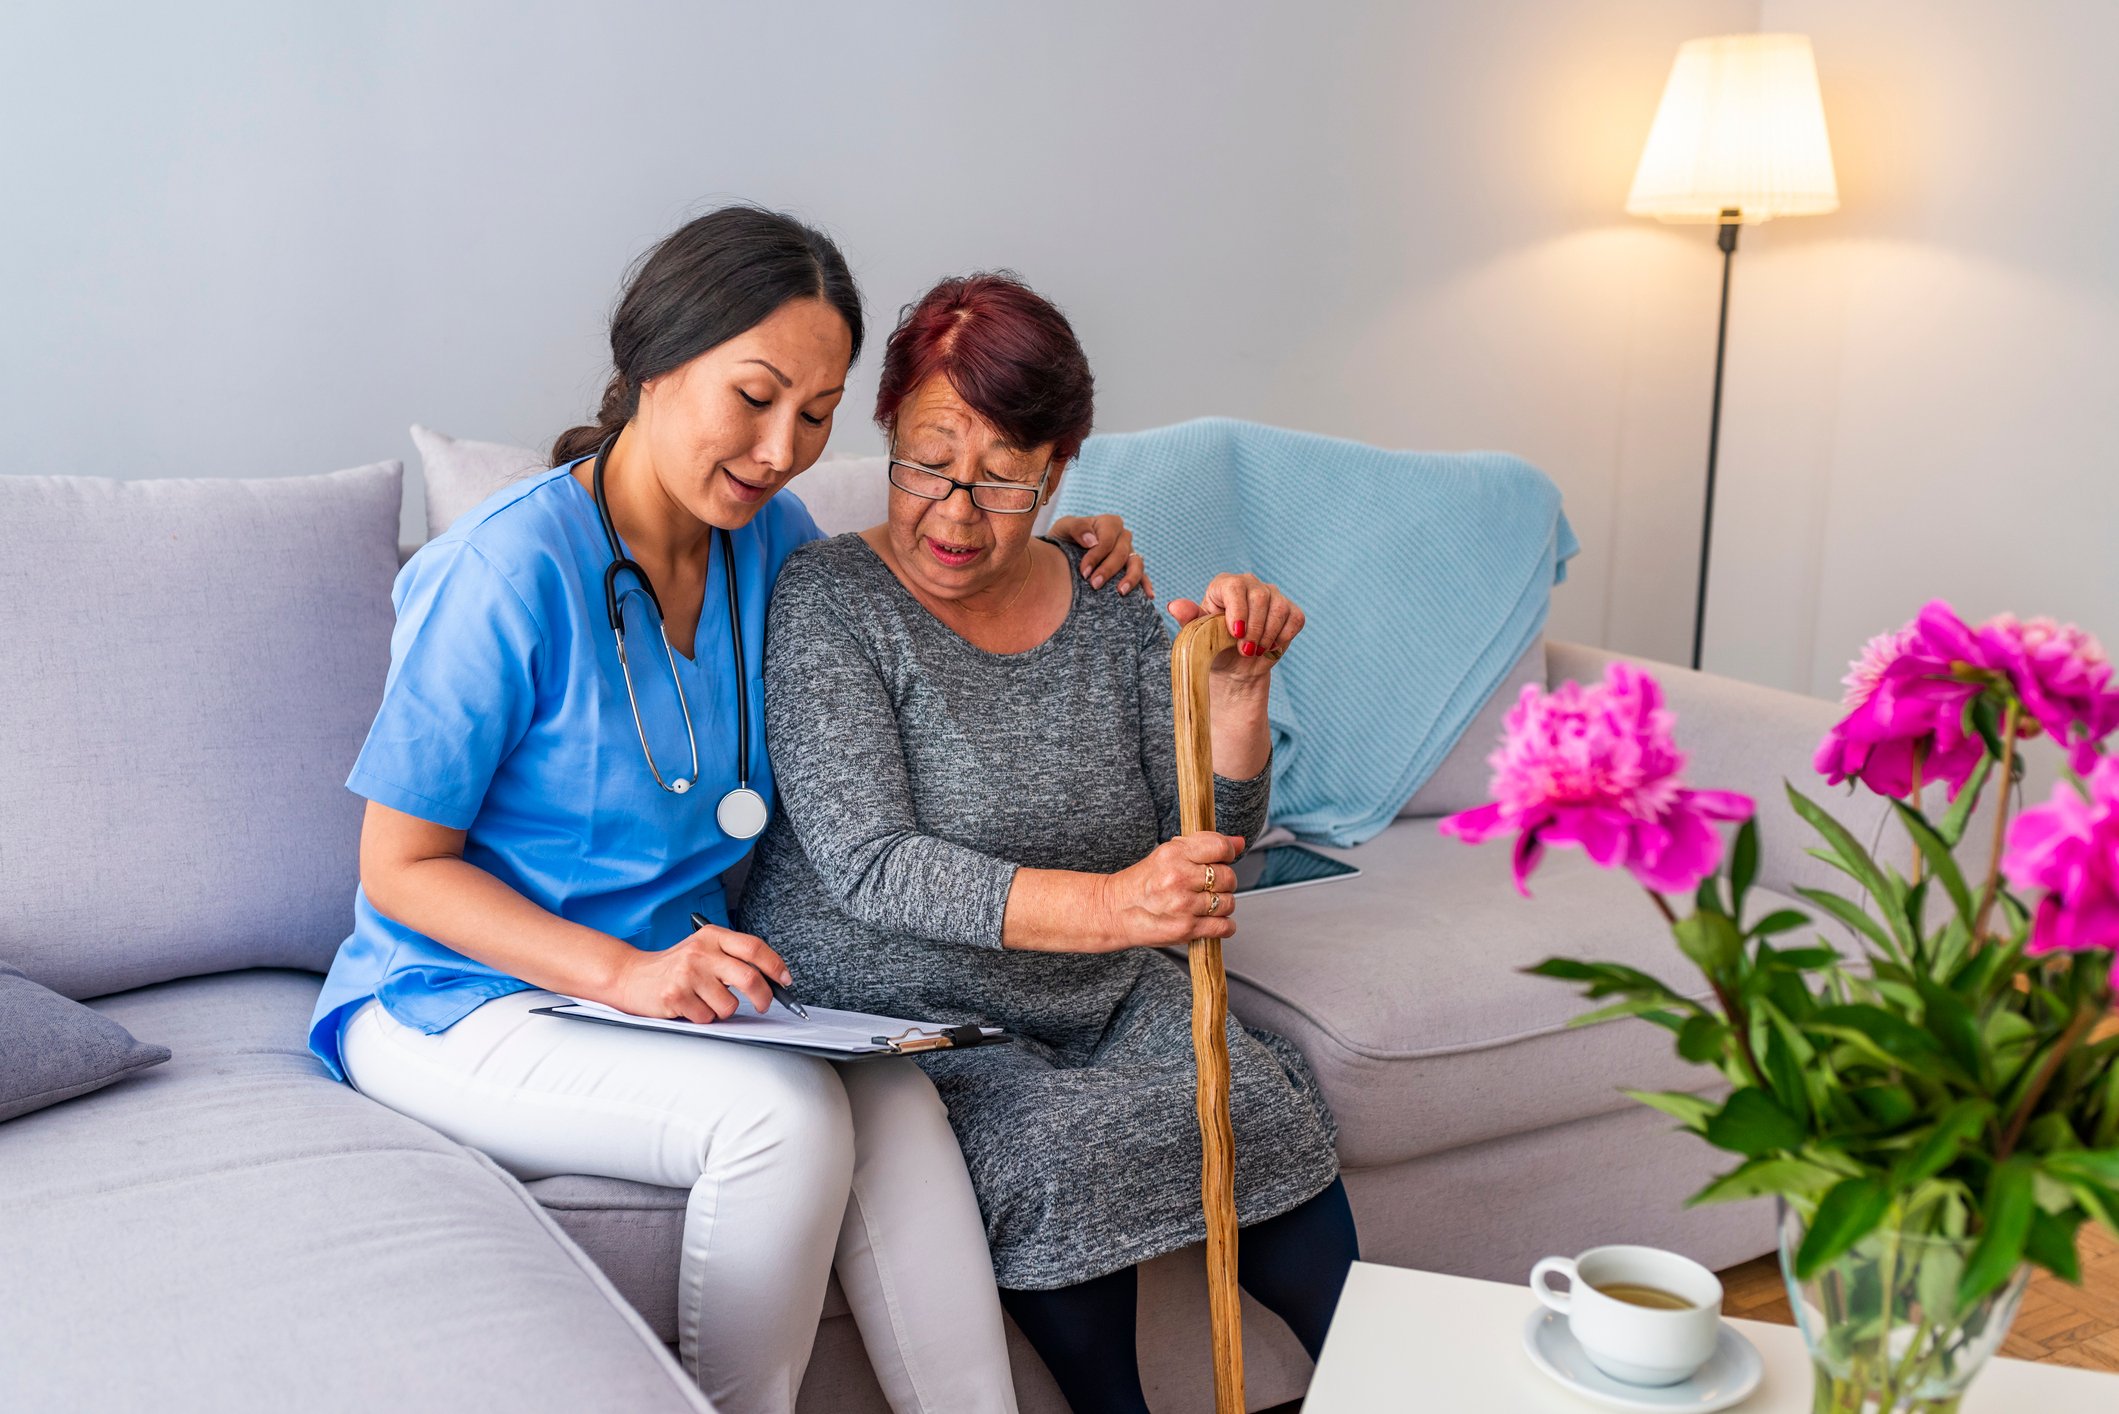 Smiling senior woman with walking stick and helpful caregiver holding her hand